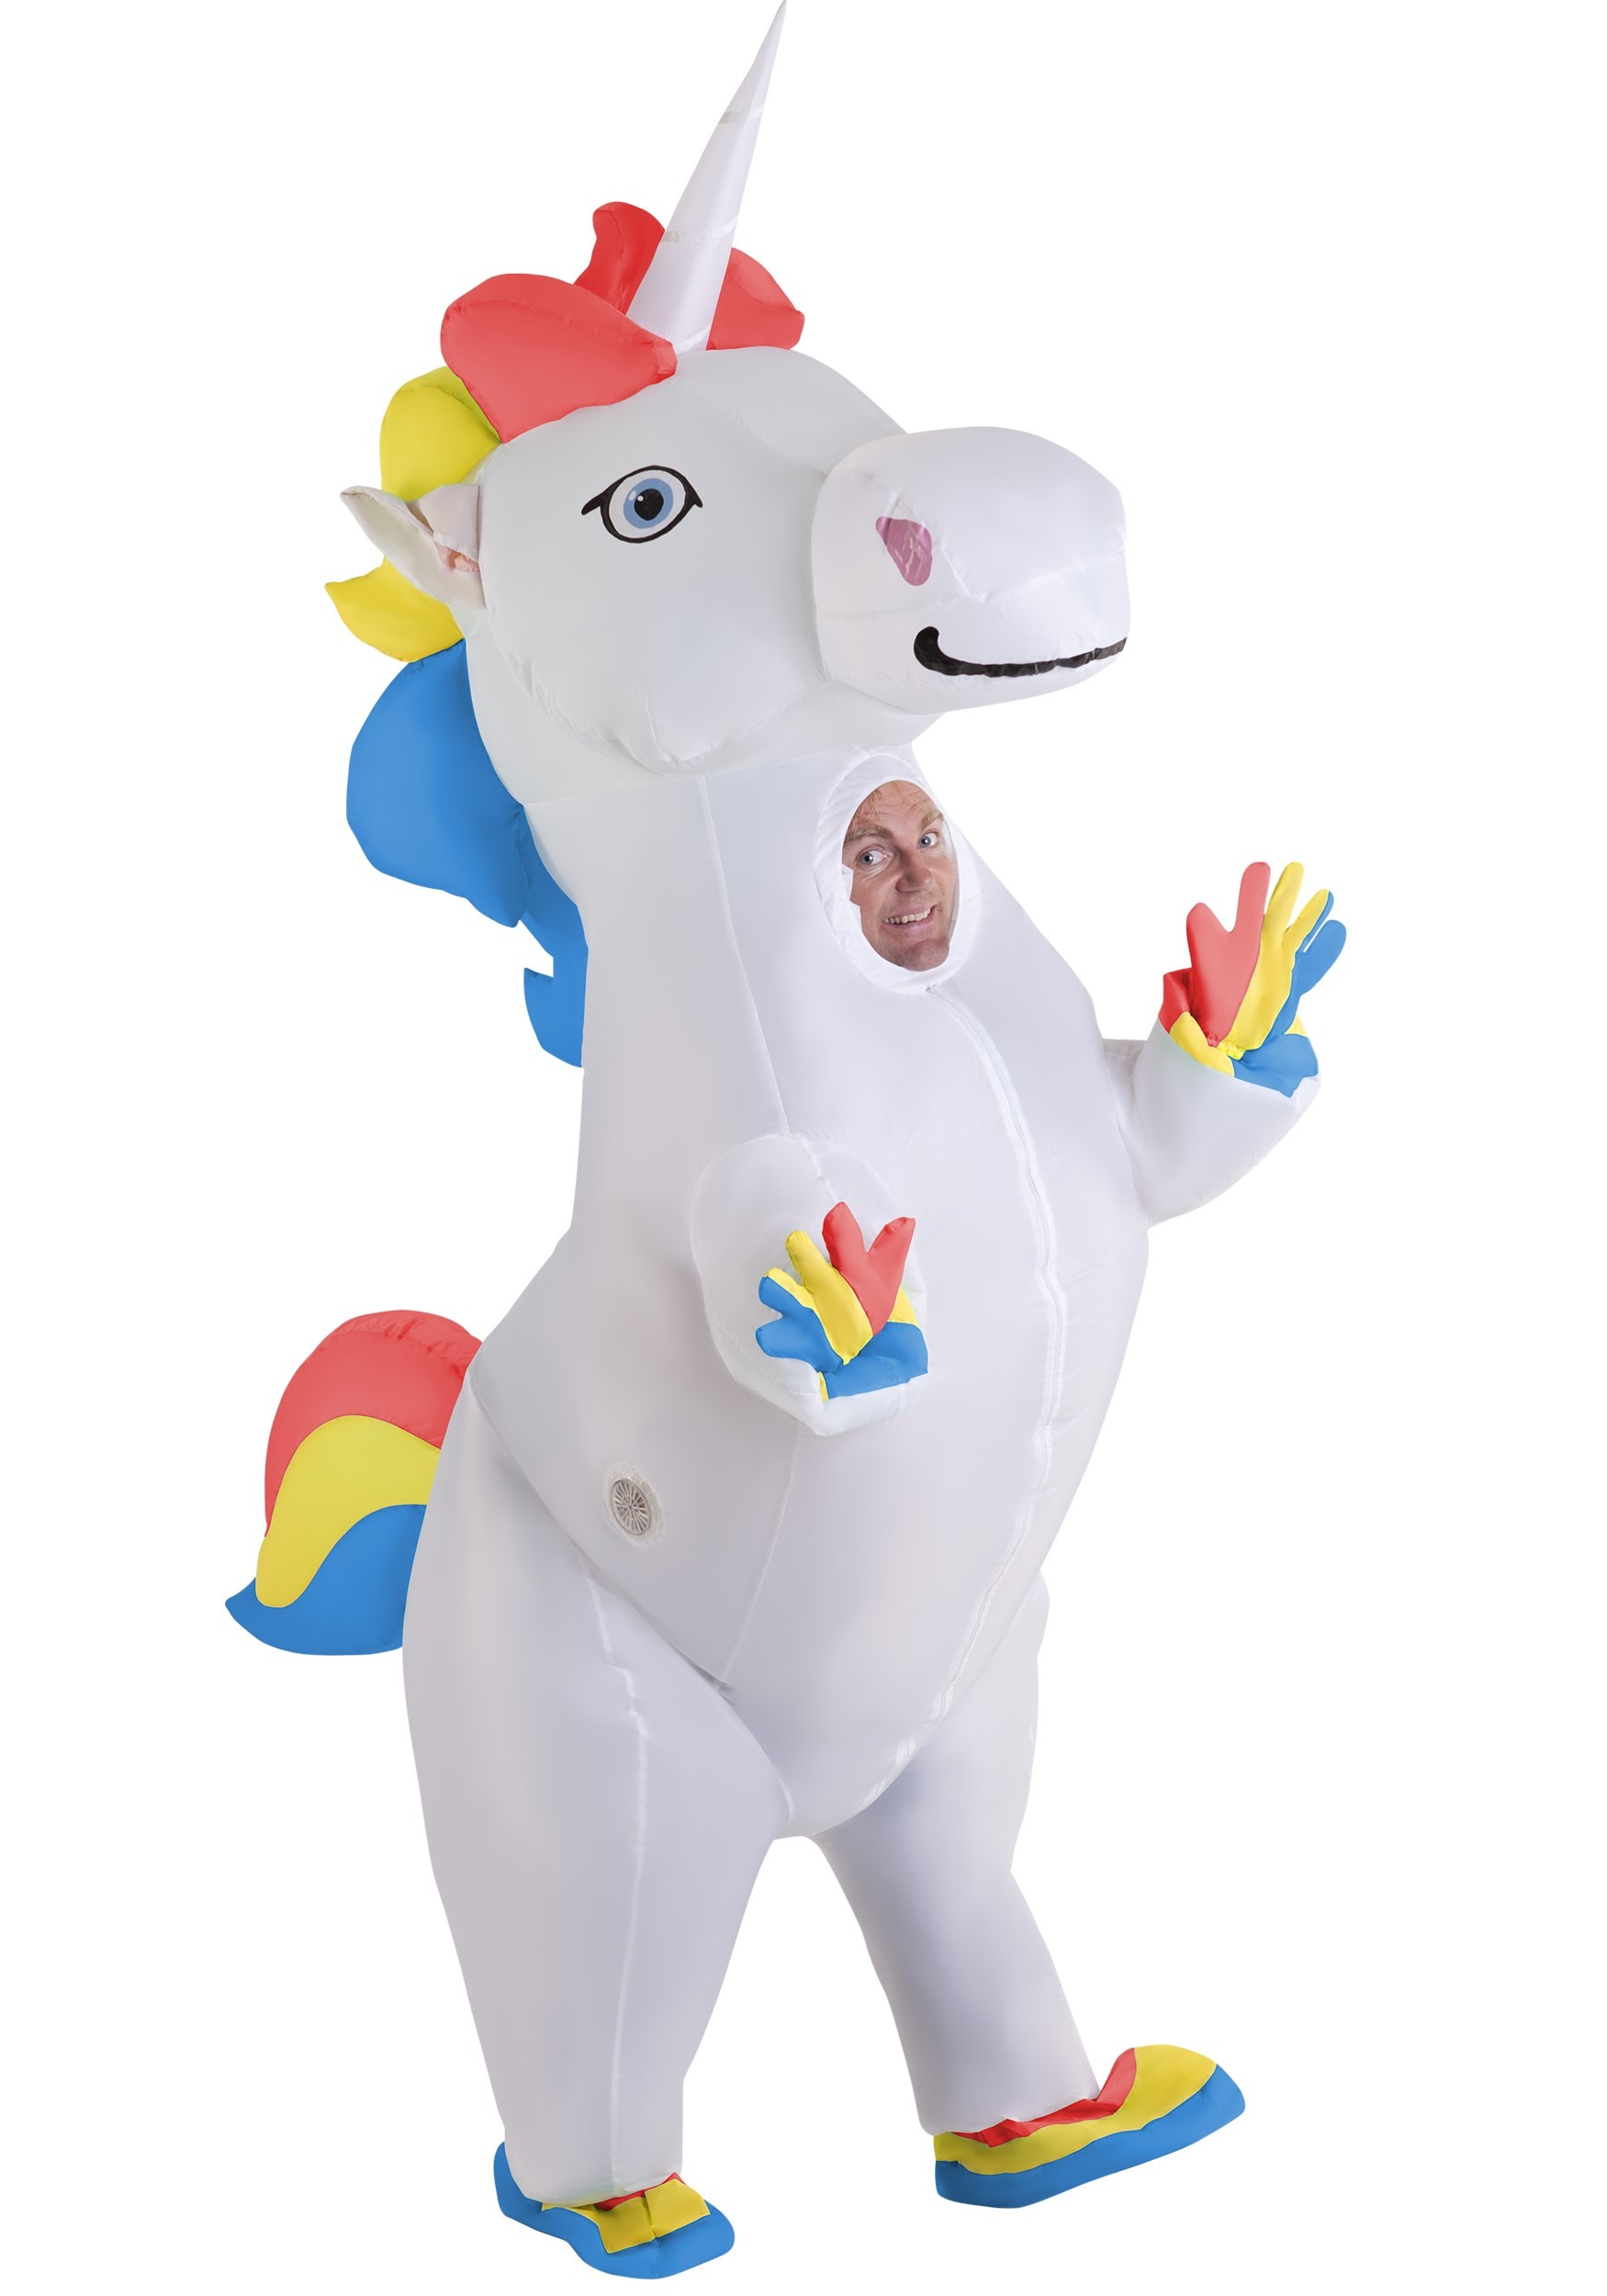 The Adult Inflatable Prancing Unicorn Costume